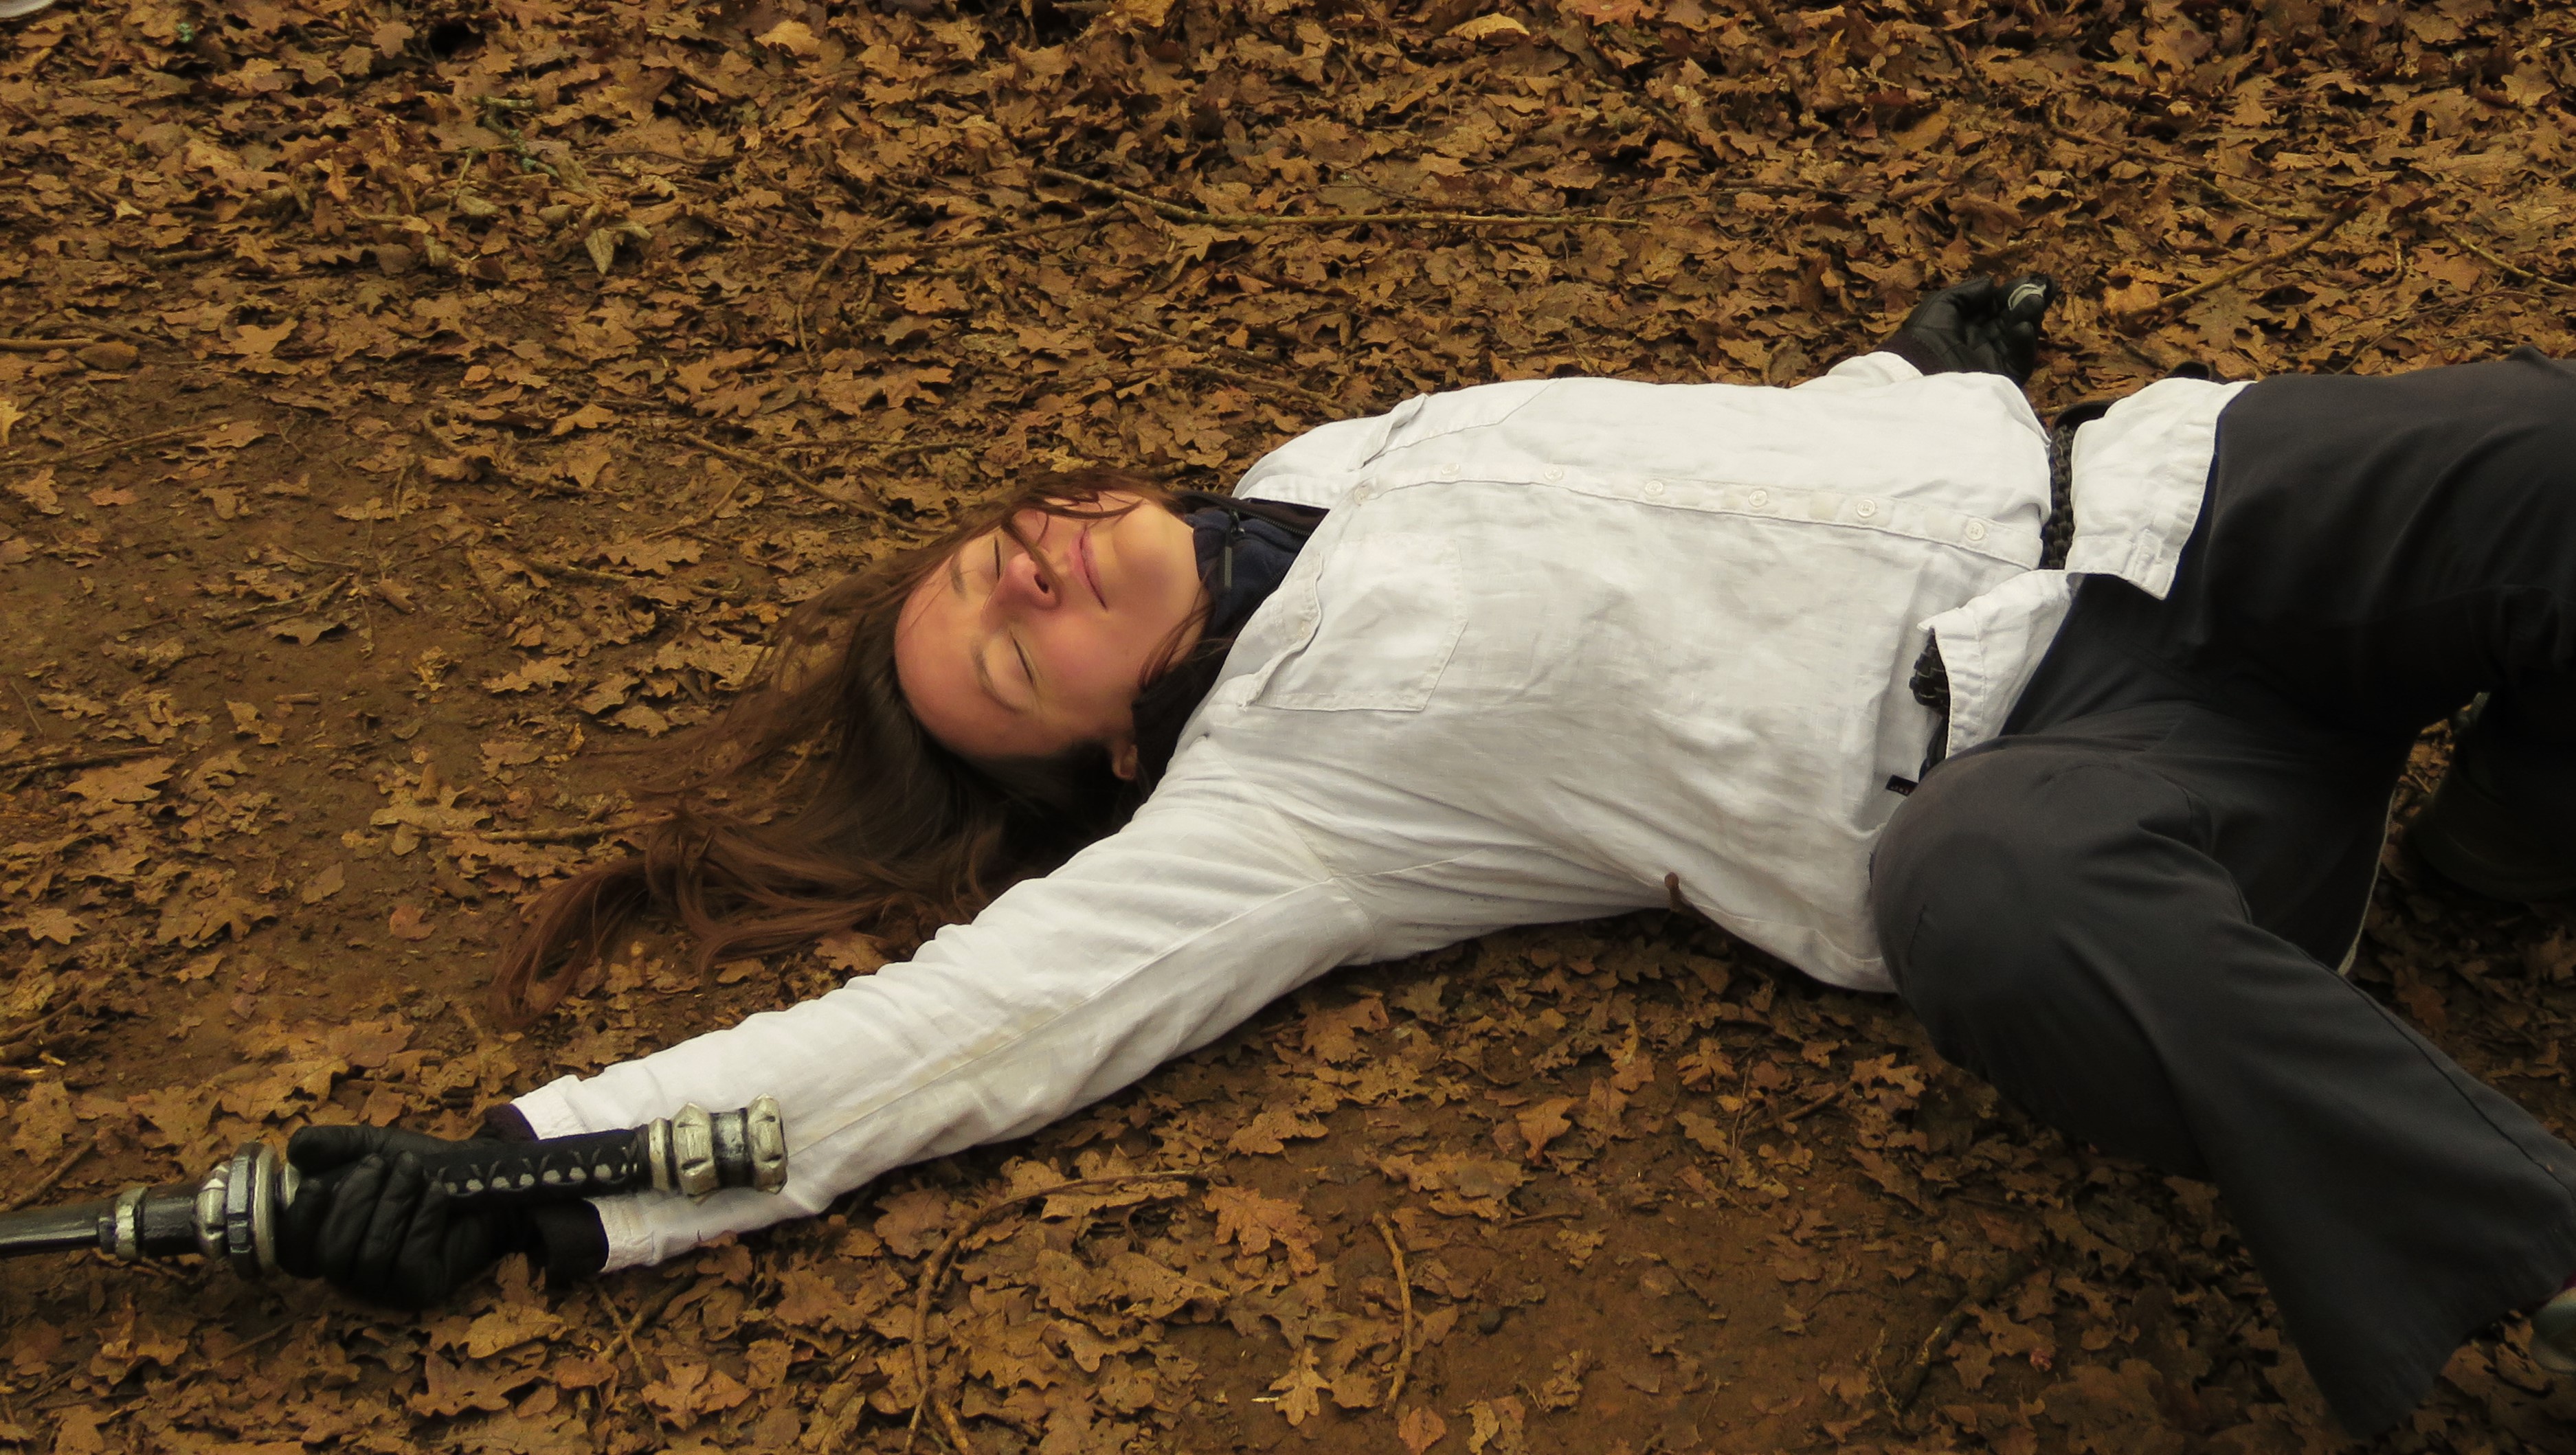  A player in a white shirt collapsed on a path strewn with brown leaves, weapon hand outstretched.